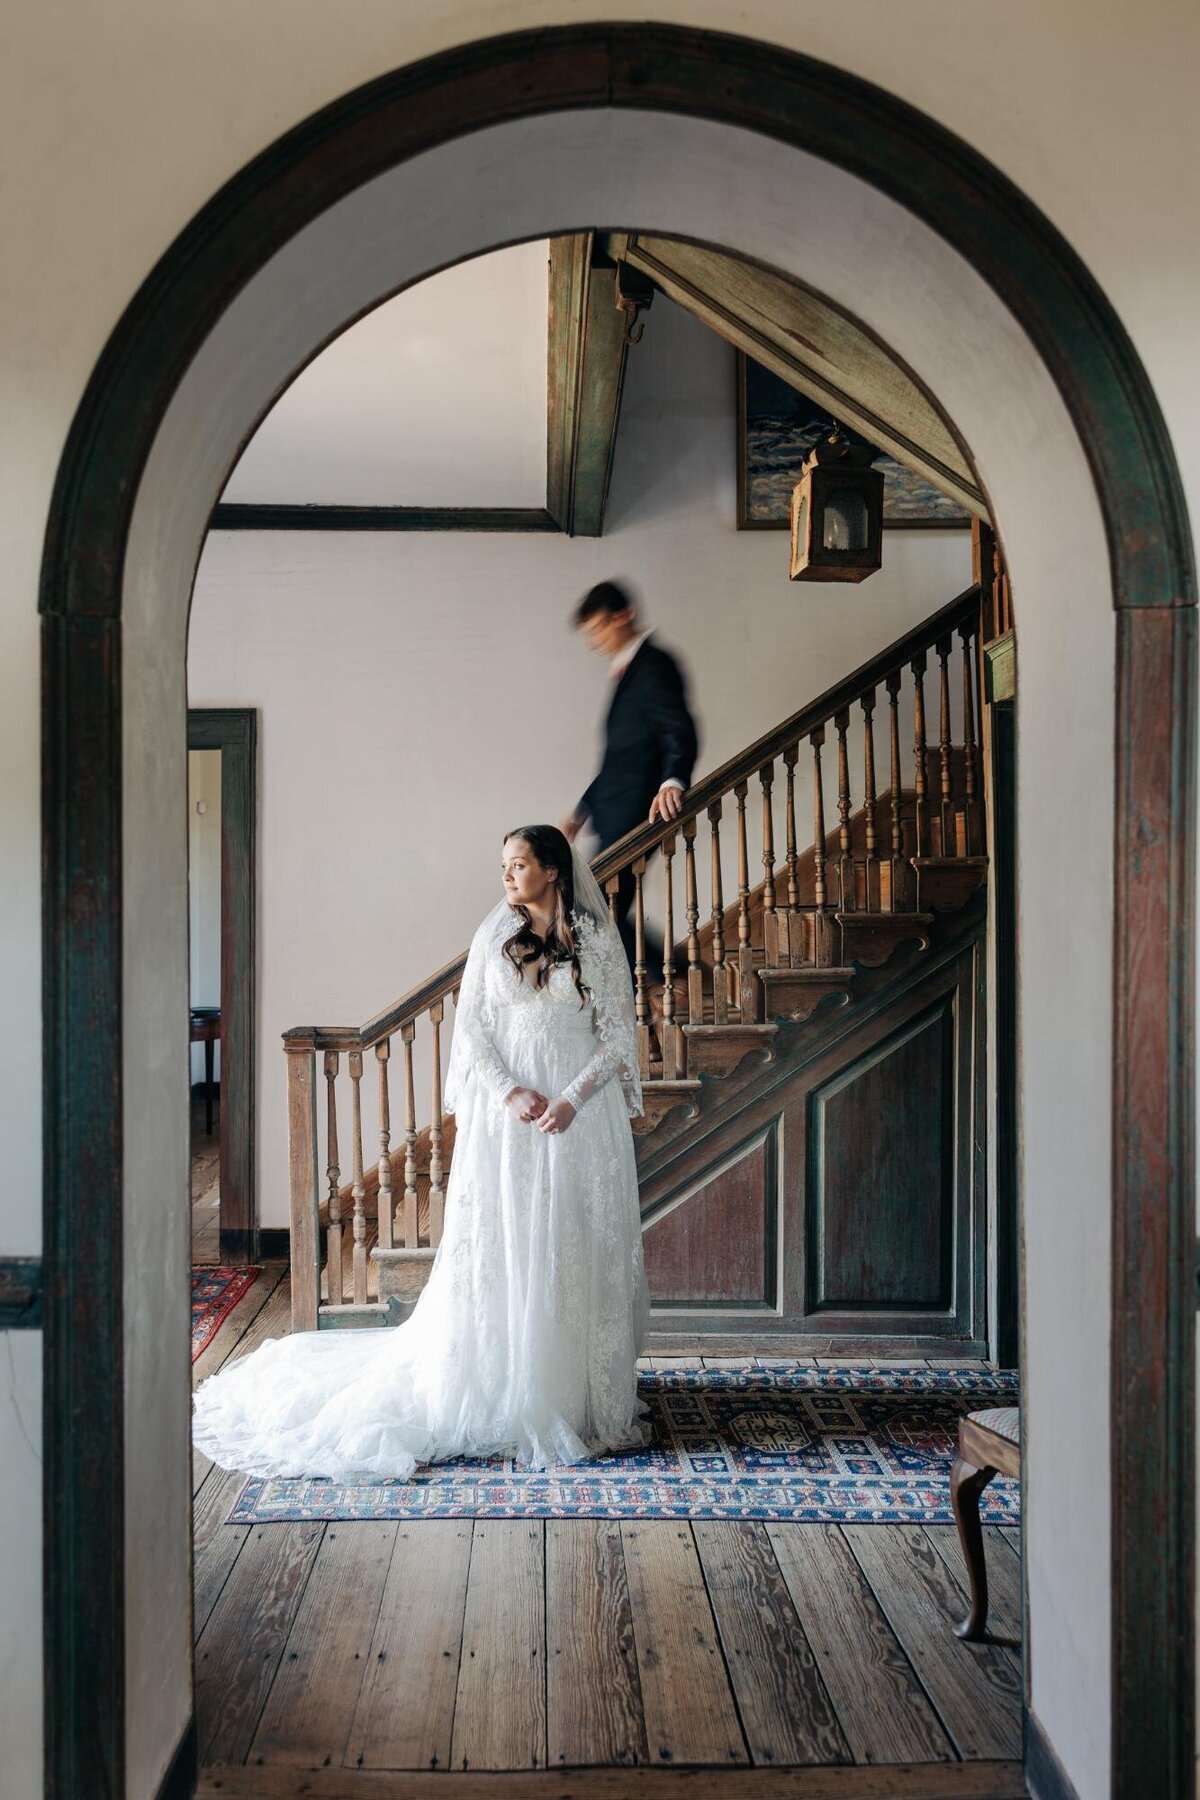 A bride standing in an archway with a groom descending a staircase behind her.